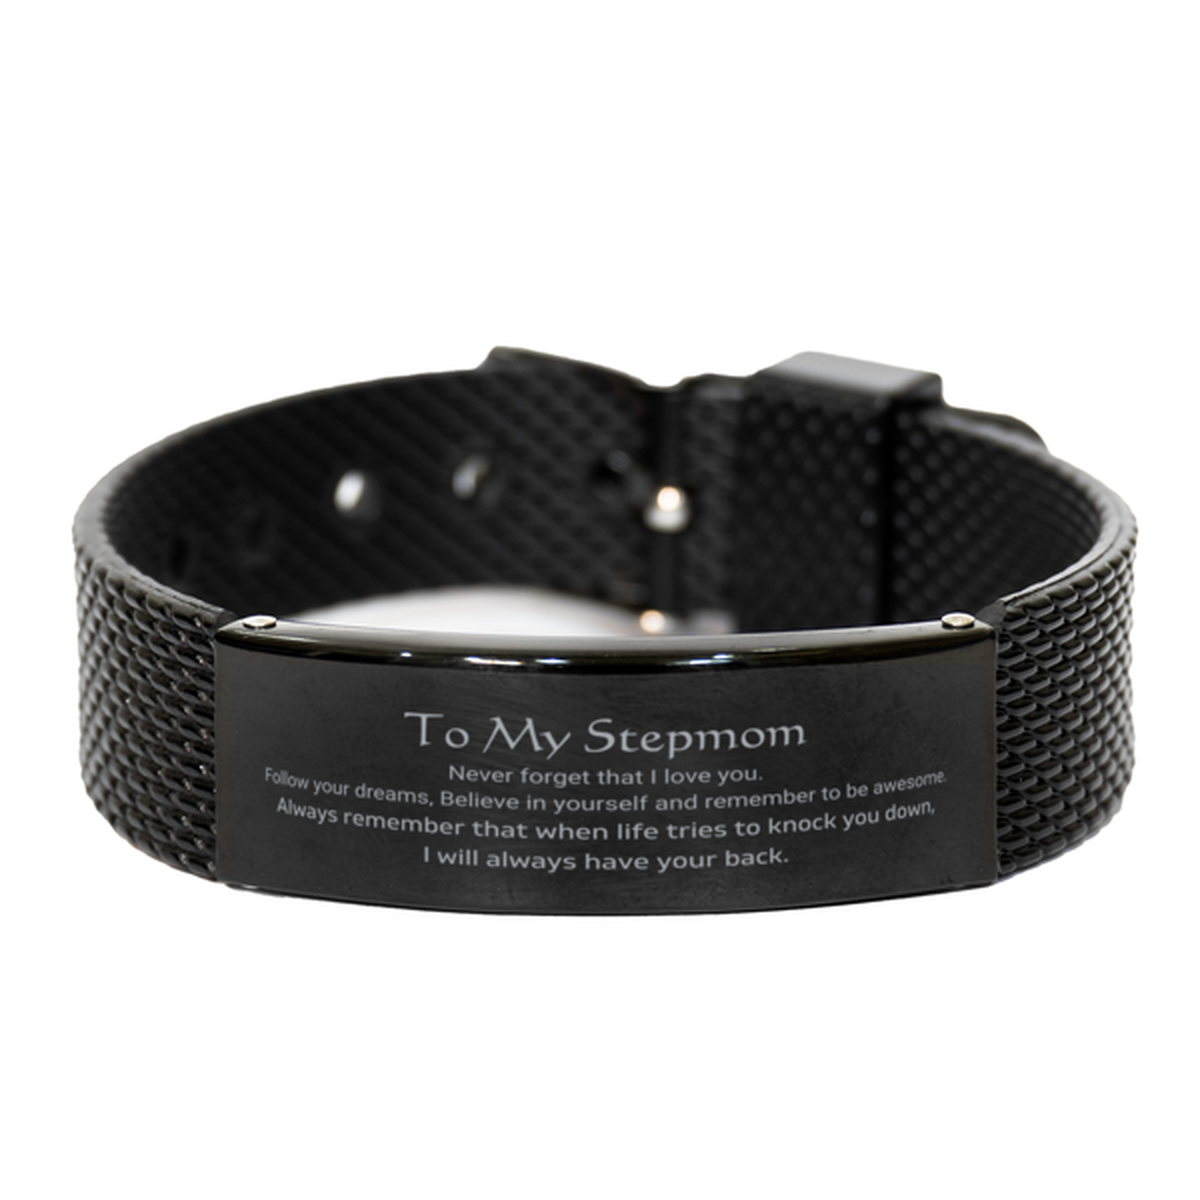 Inspirational Gifts for Stepmom, Follow your dreams, Believe in yourself, Stepmom Black Shark Mesh Bracelet, Birthday Christmas Unique Gifts For Stepmom